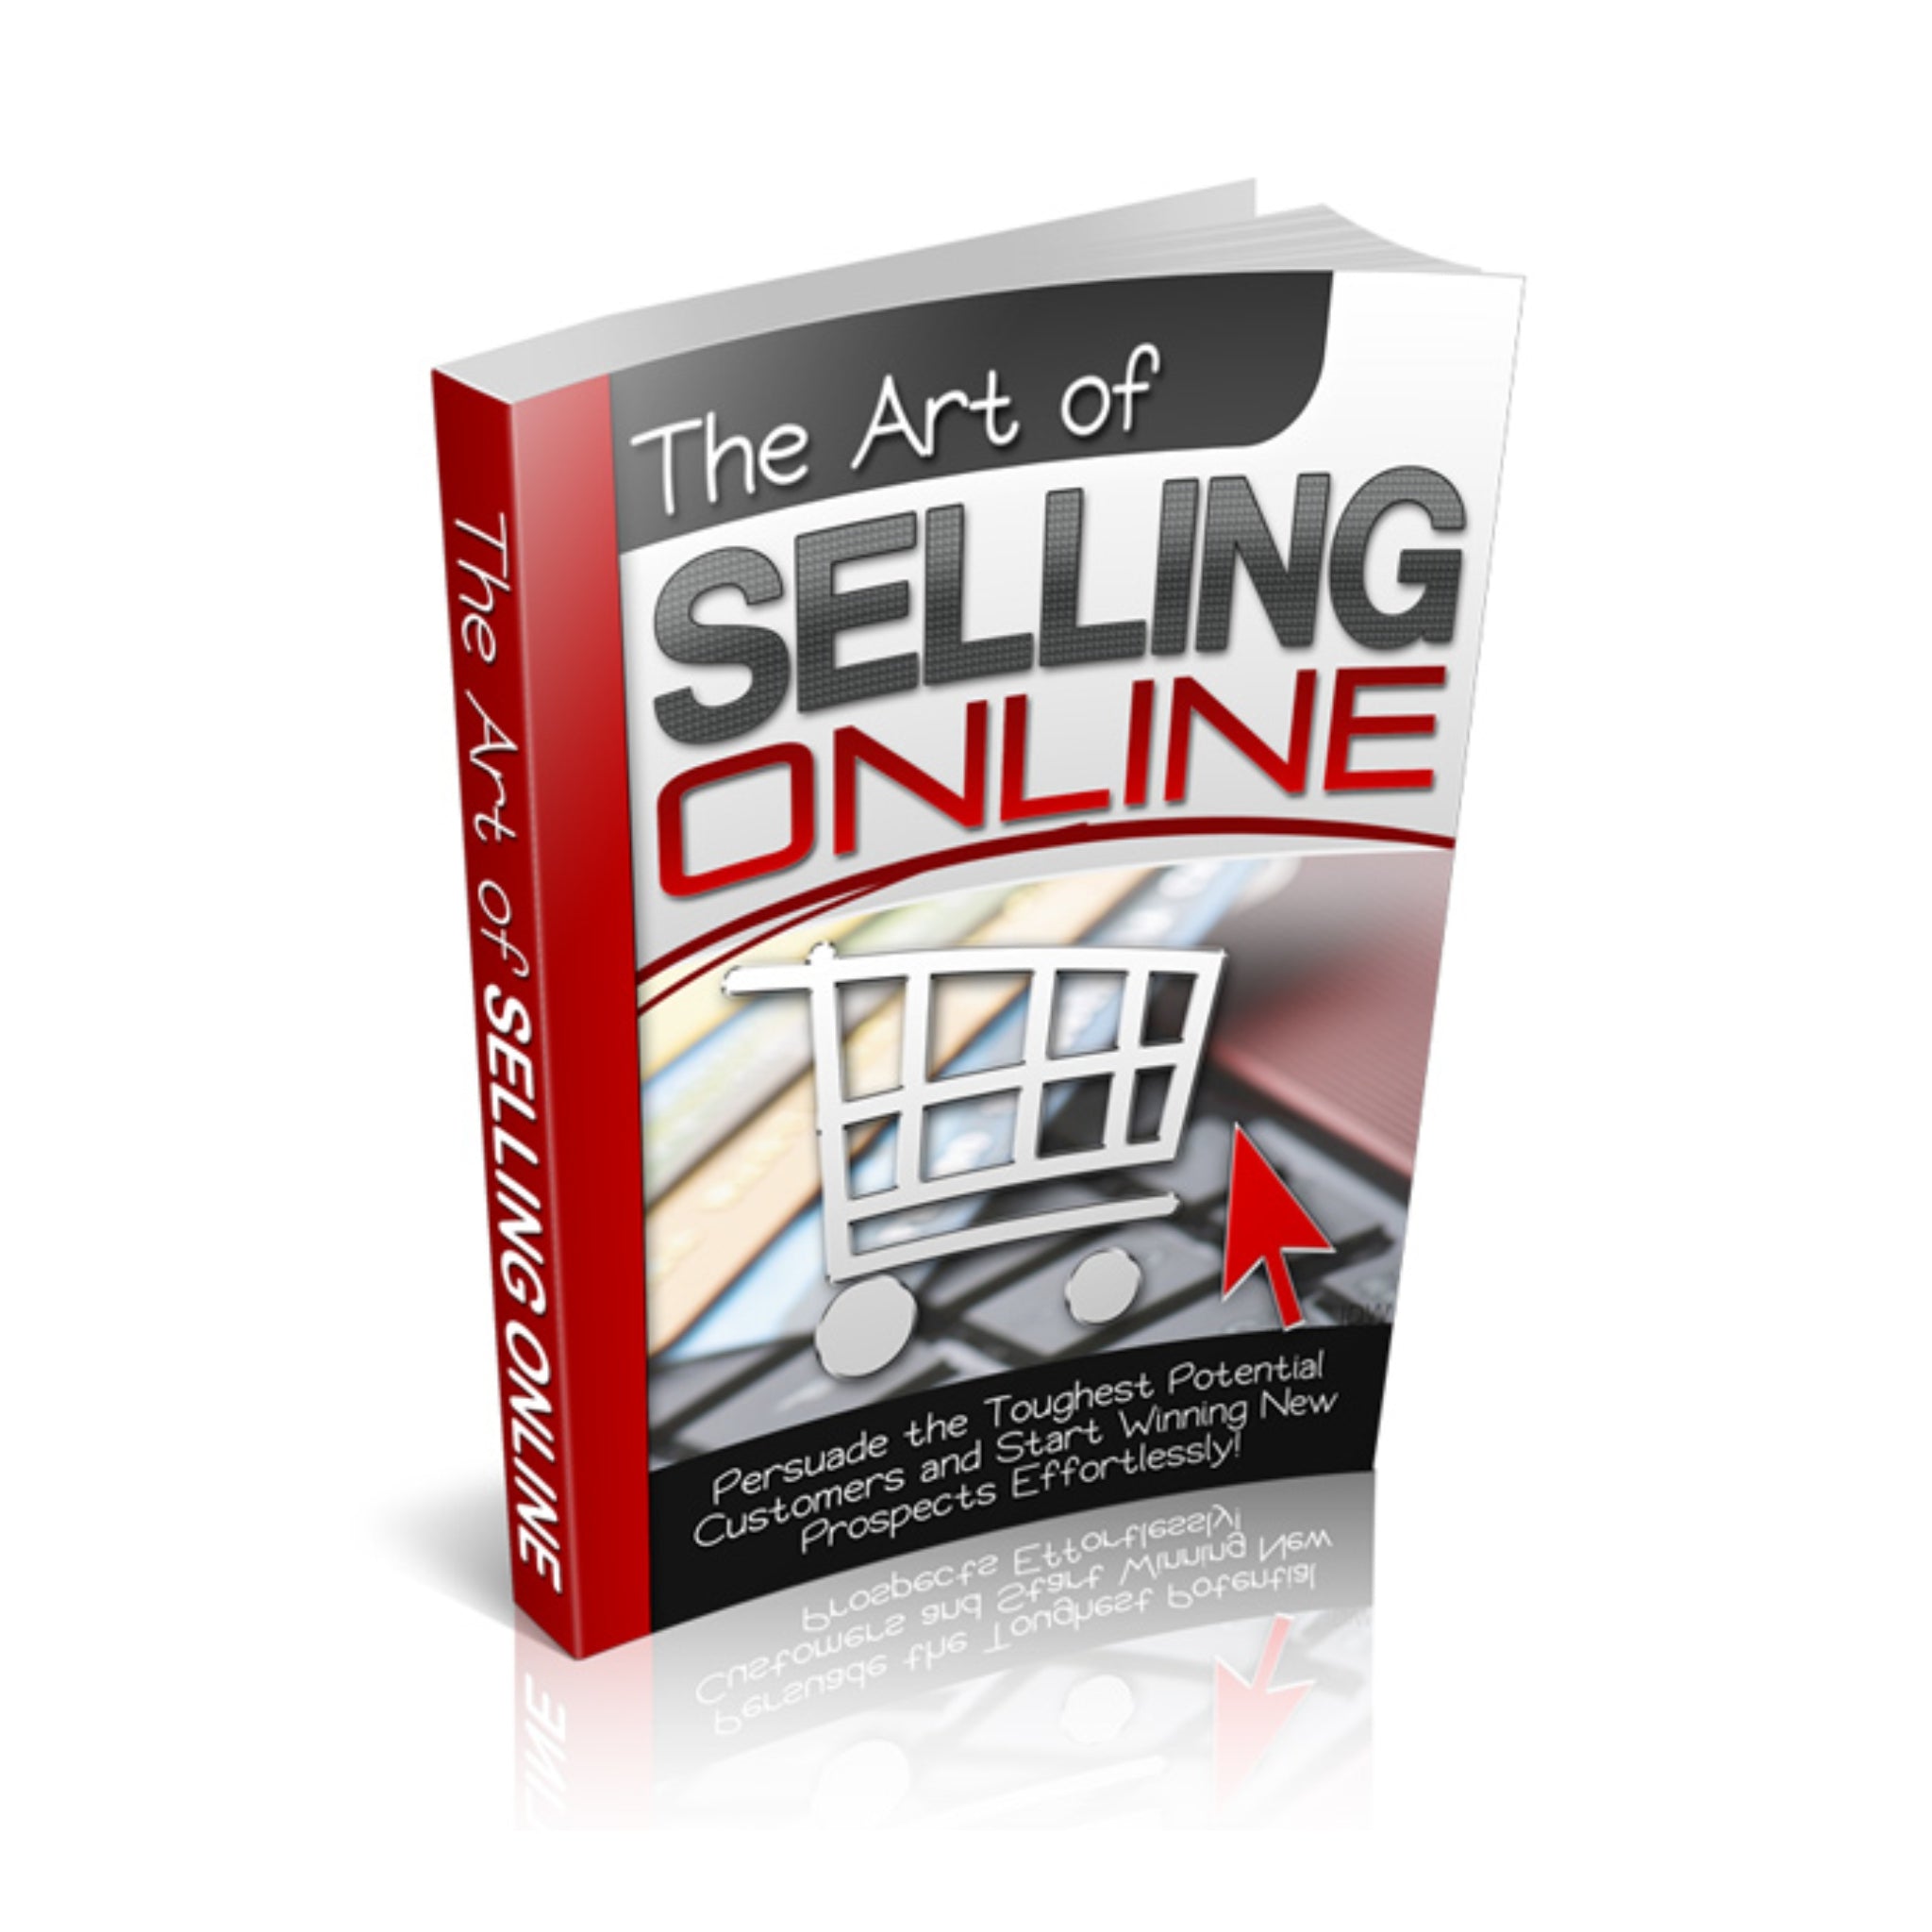 The Art Of Selling Online Ebook